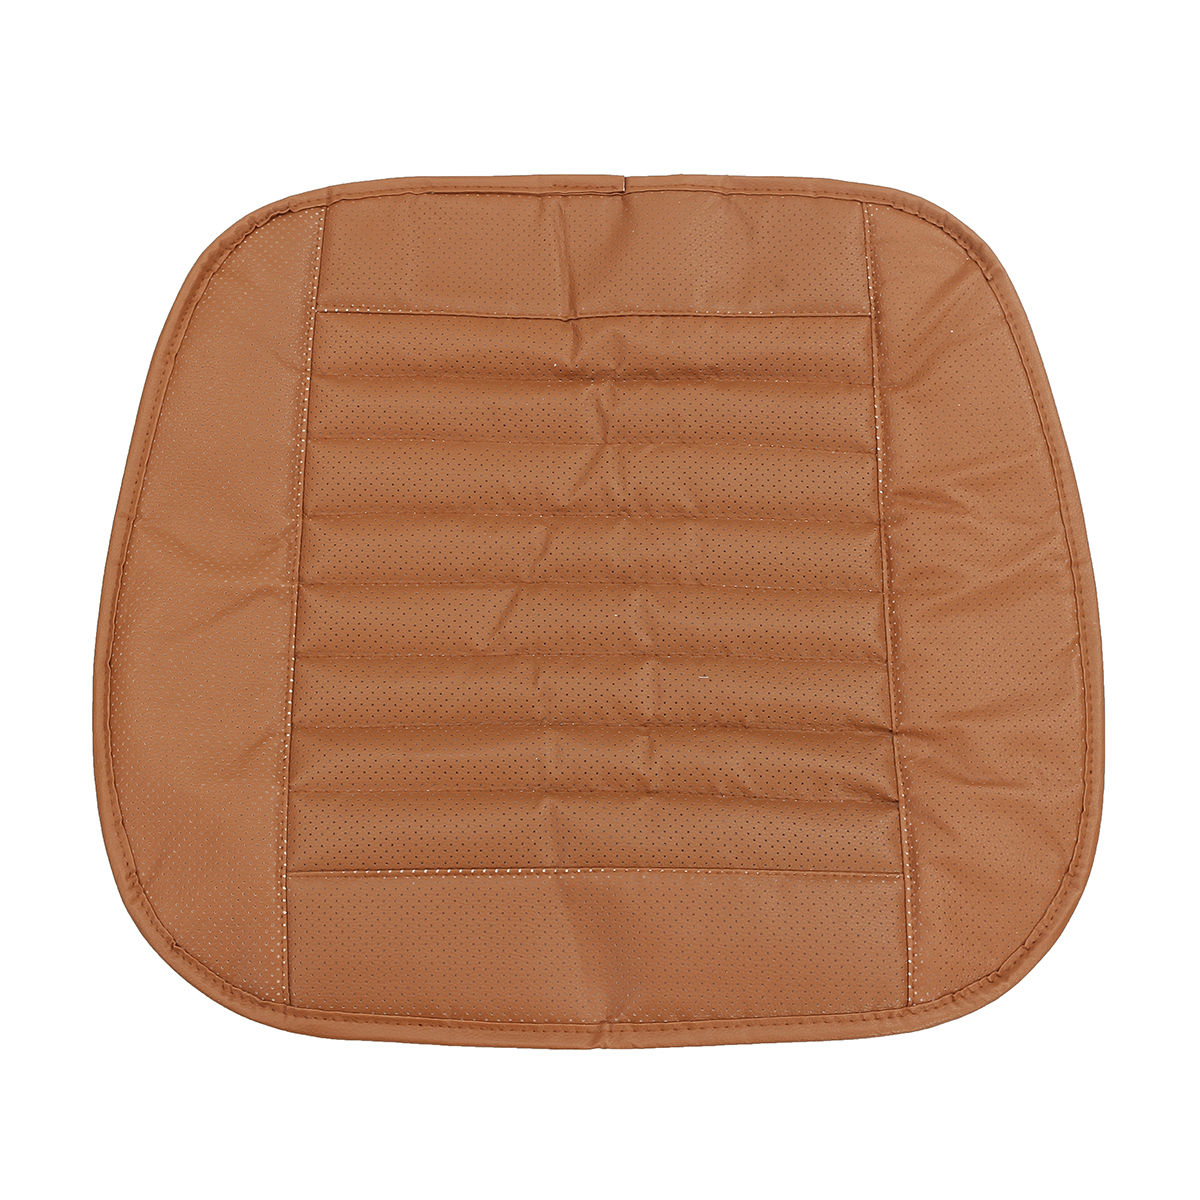 Details about 3D Car Front Seat Cover Leather Single Seat Protector Cushion Mat Breathable - Auto GoShop